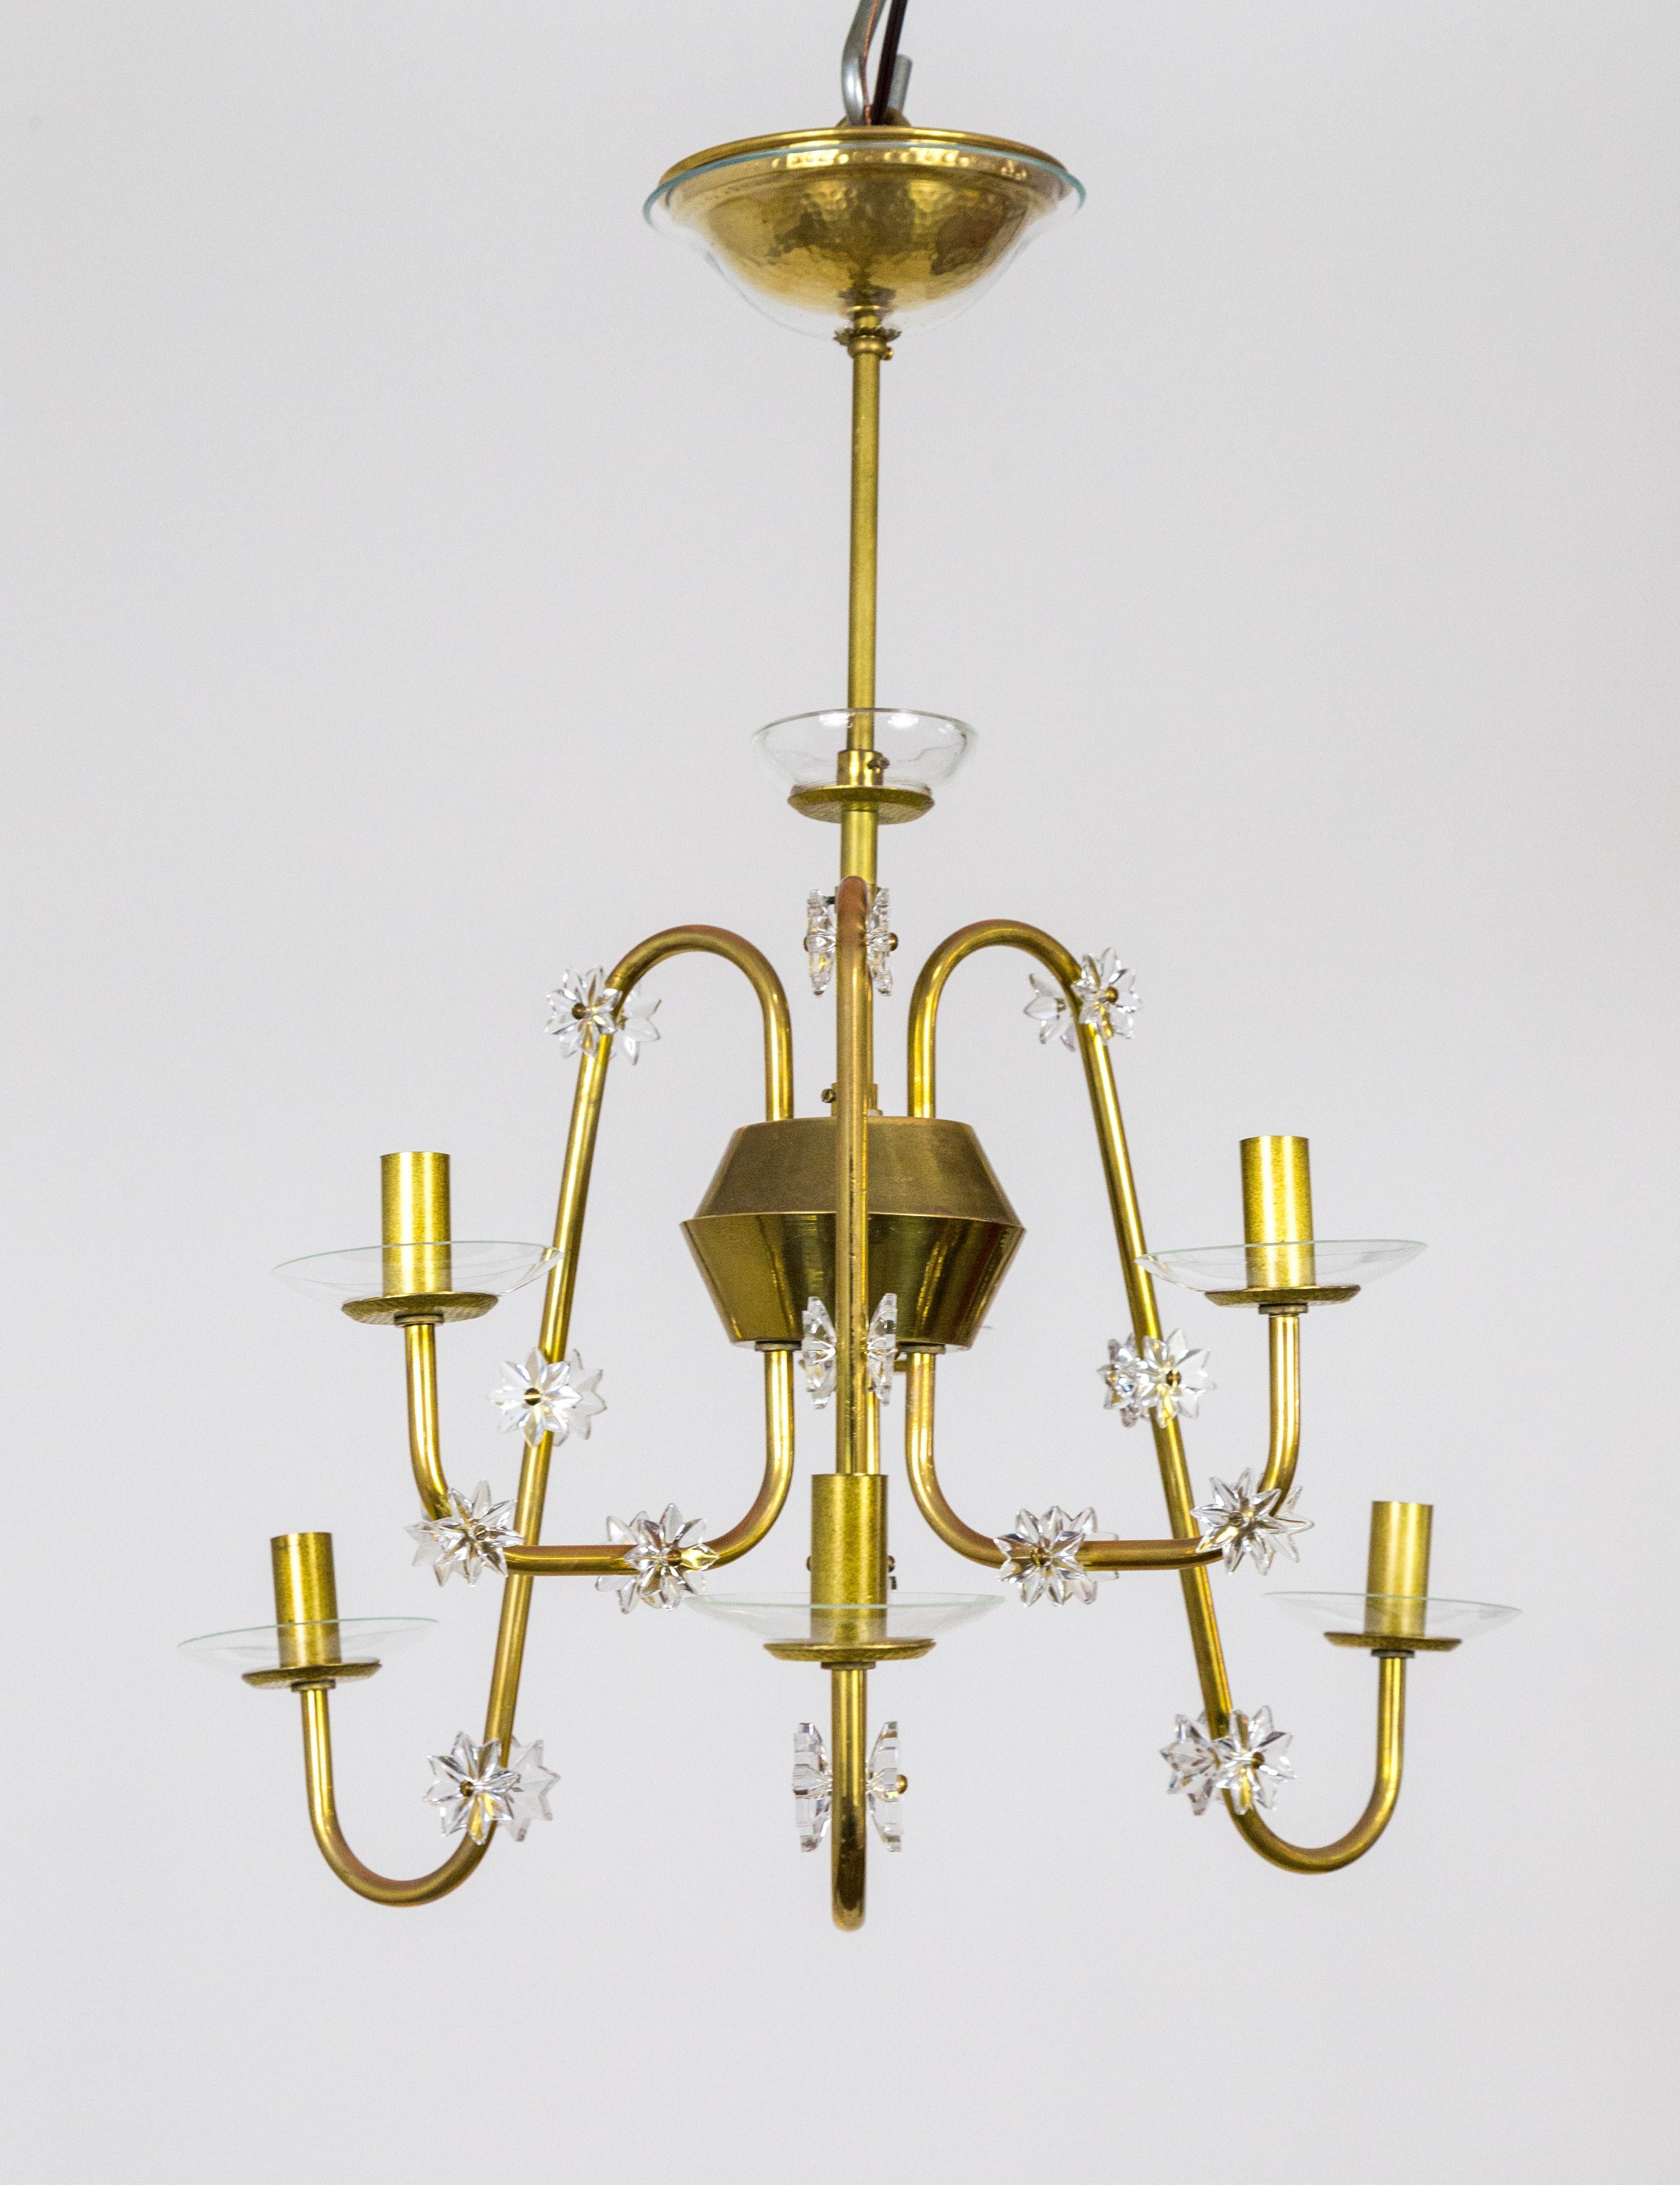 A streamlined, Mid-Century Modern, brass chandelier with six arms swooping up and down from the main stem piece. Delicate, glass bobeches sit on hammer-textured brass disks, echoed on the mid point of the stem. With a glass covered canopy and star